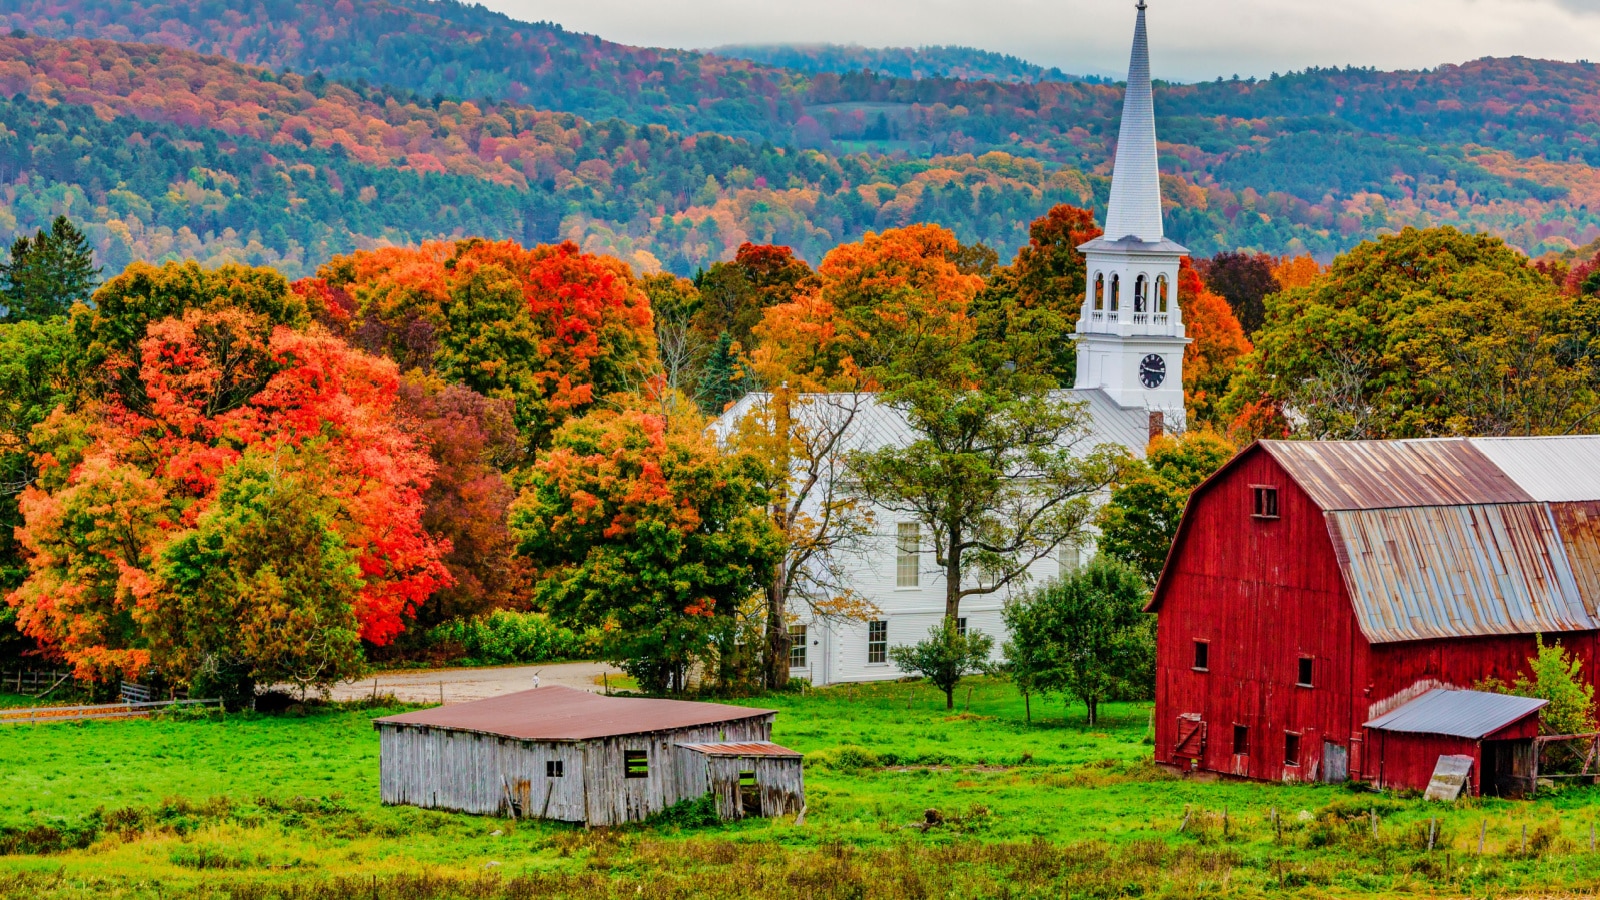 Woodstock, Vermont - October 8, 2018 - Red barn and church next to a harvested cornfiield with the Autumn colors in the background